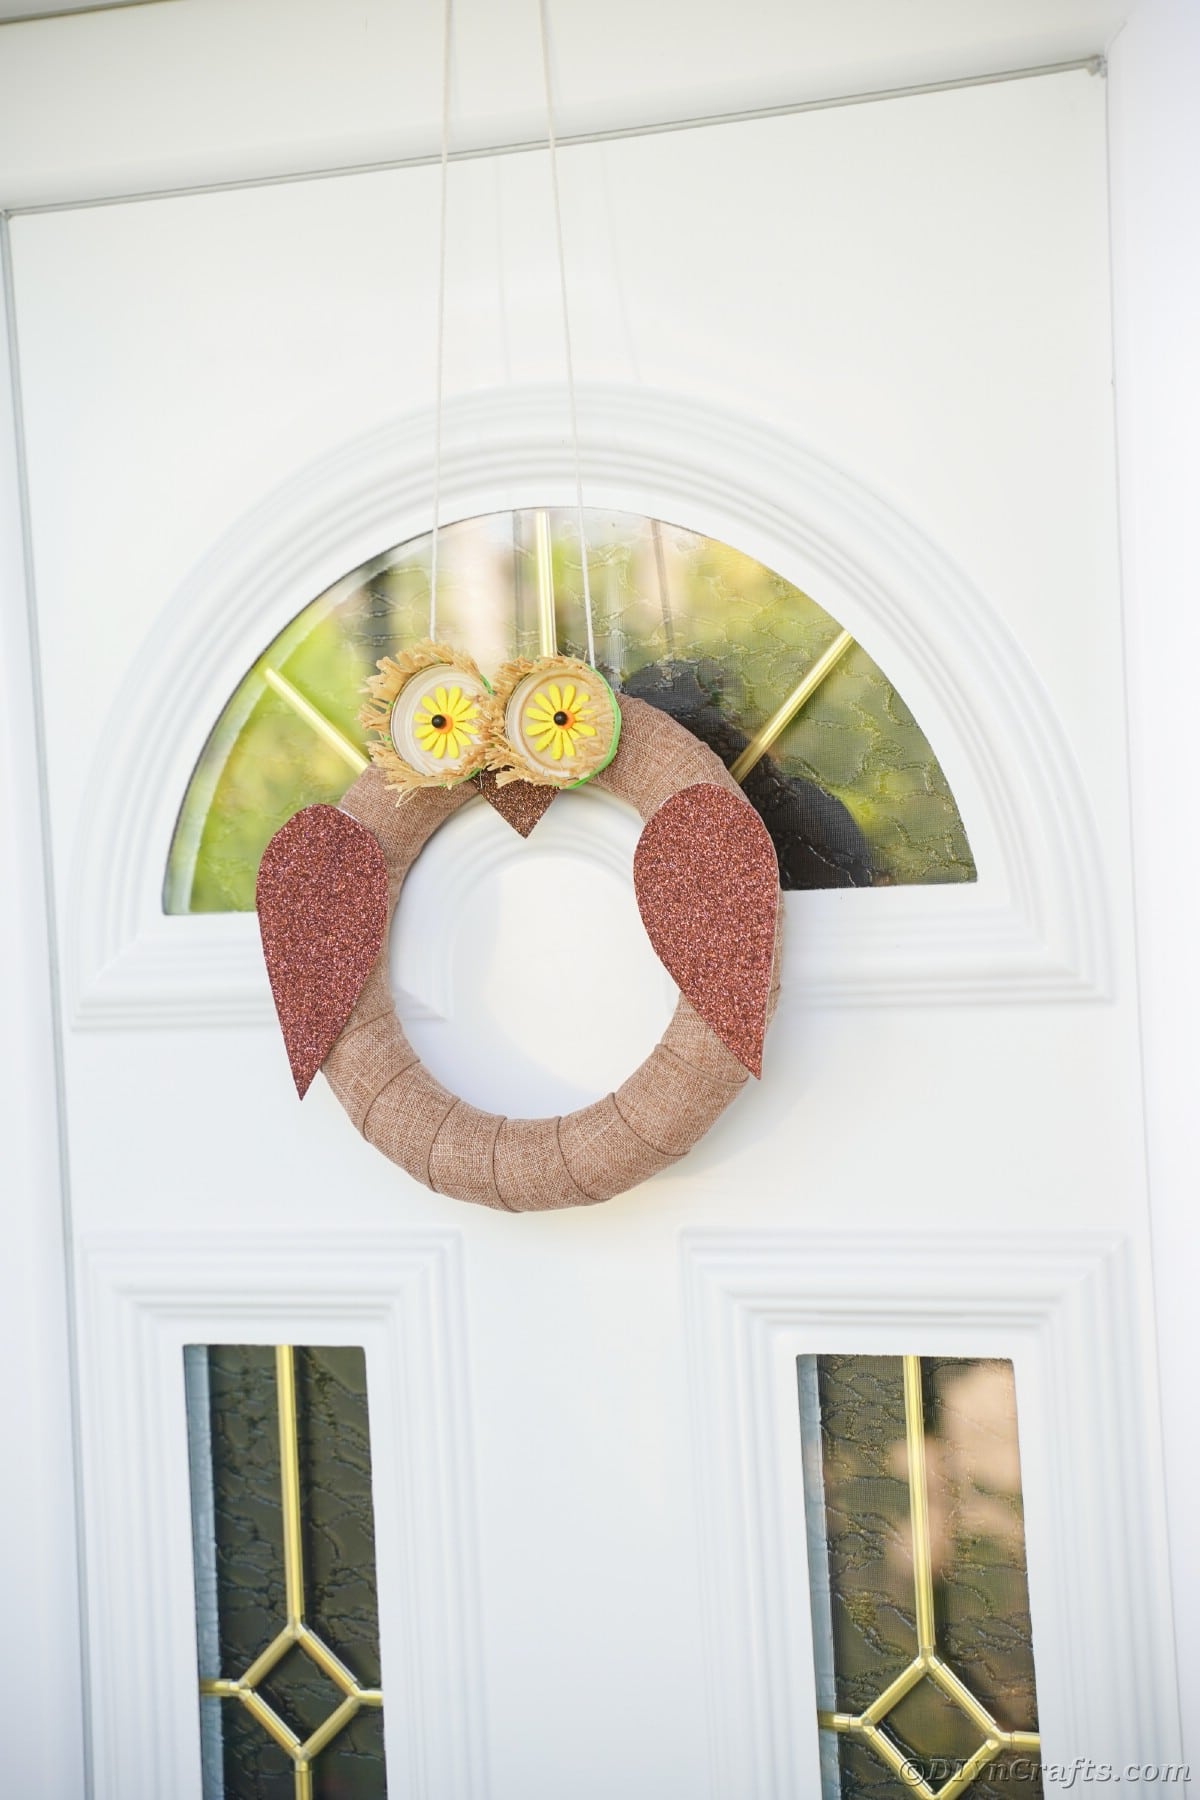 White door with glass panels holding owl wreath